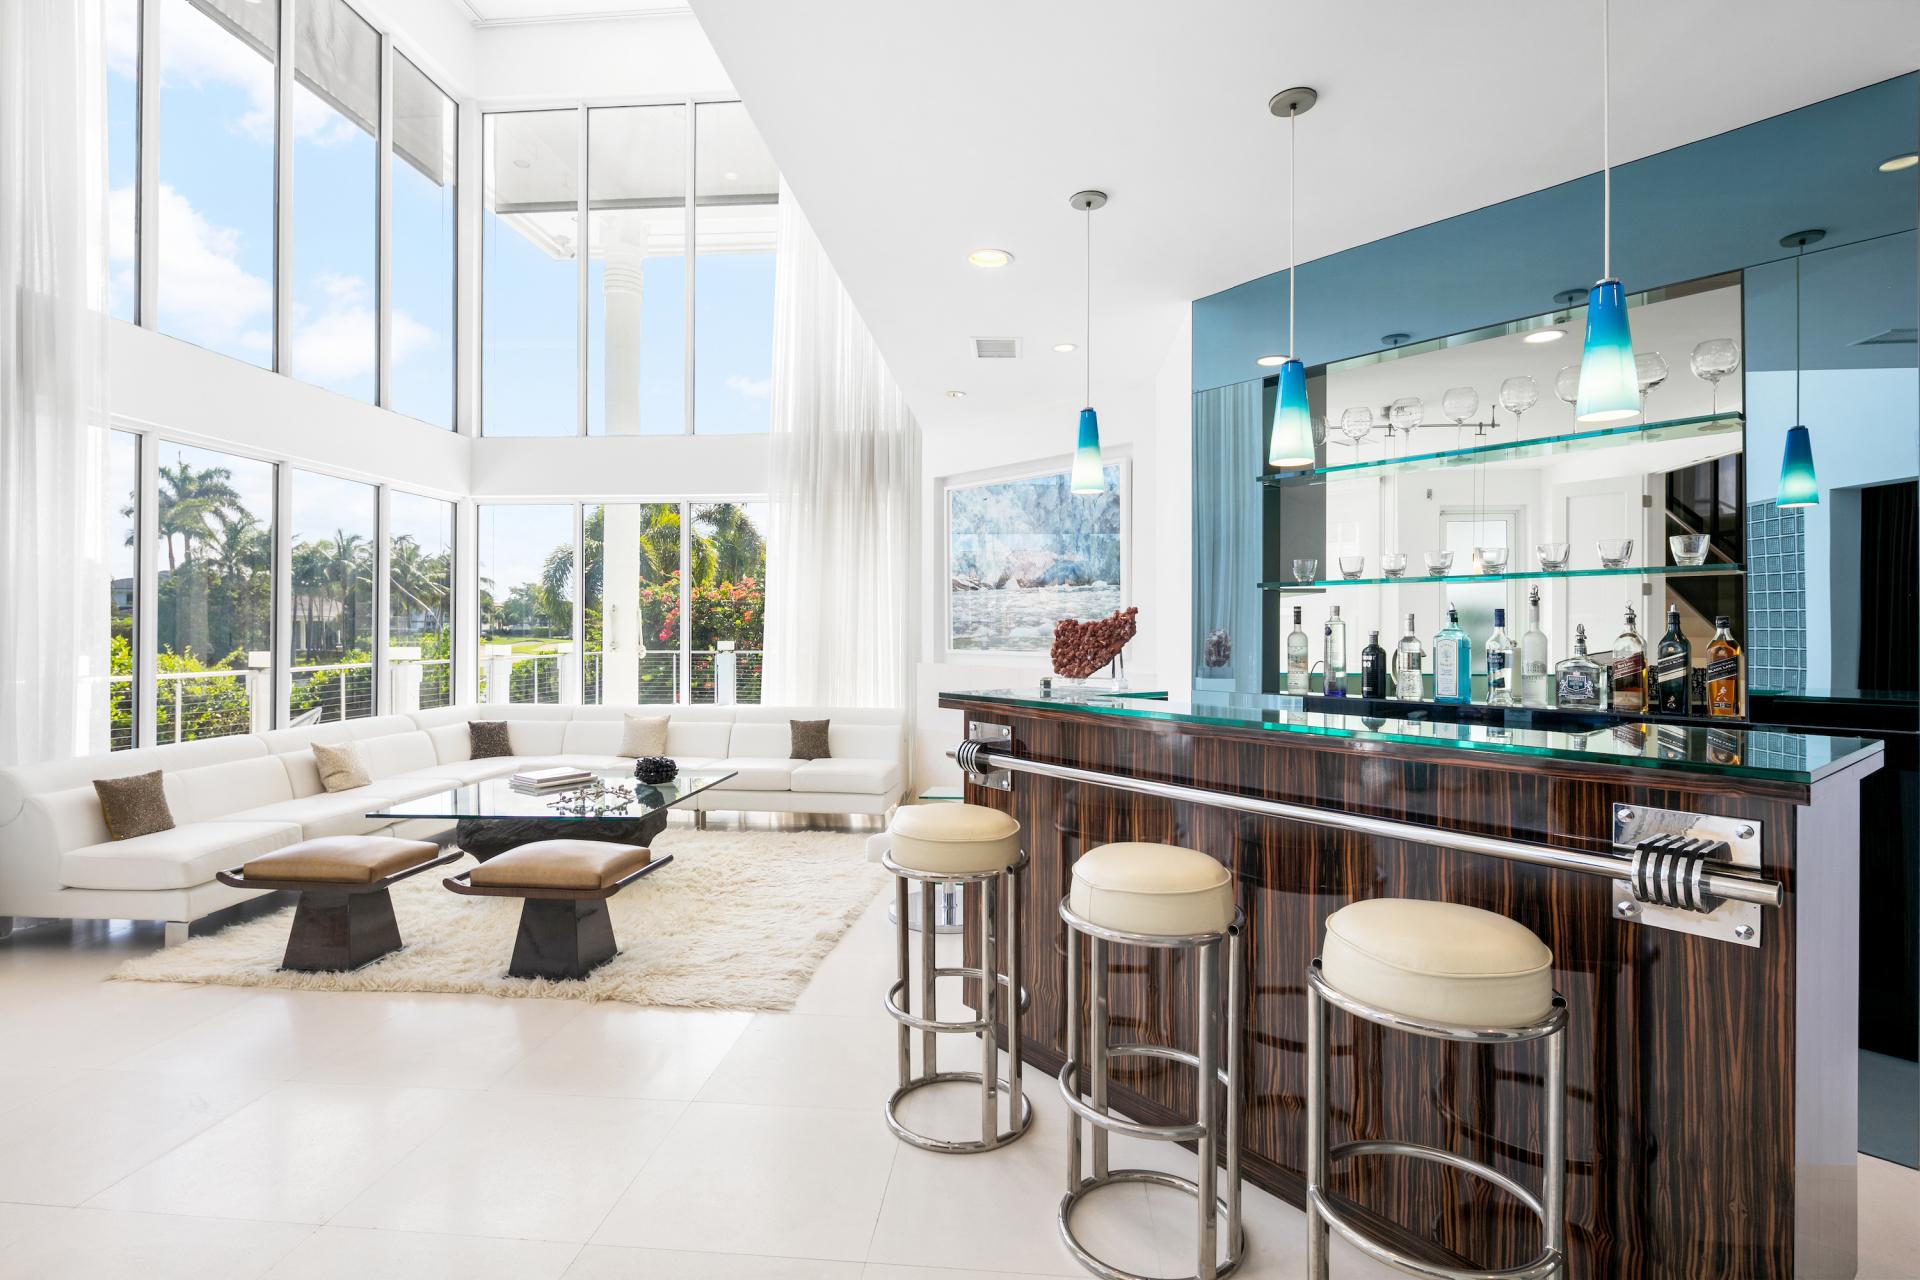 Inside a US$6 Million Art Deco-Style Florida Home with European Features and Colourful Accents